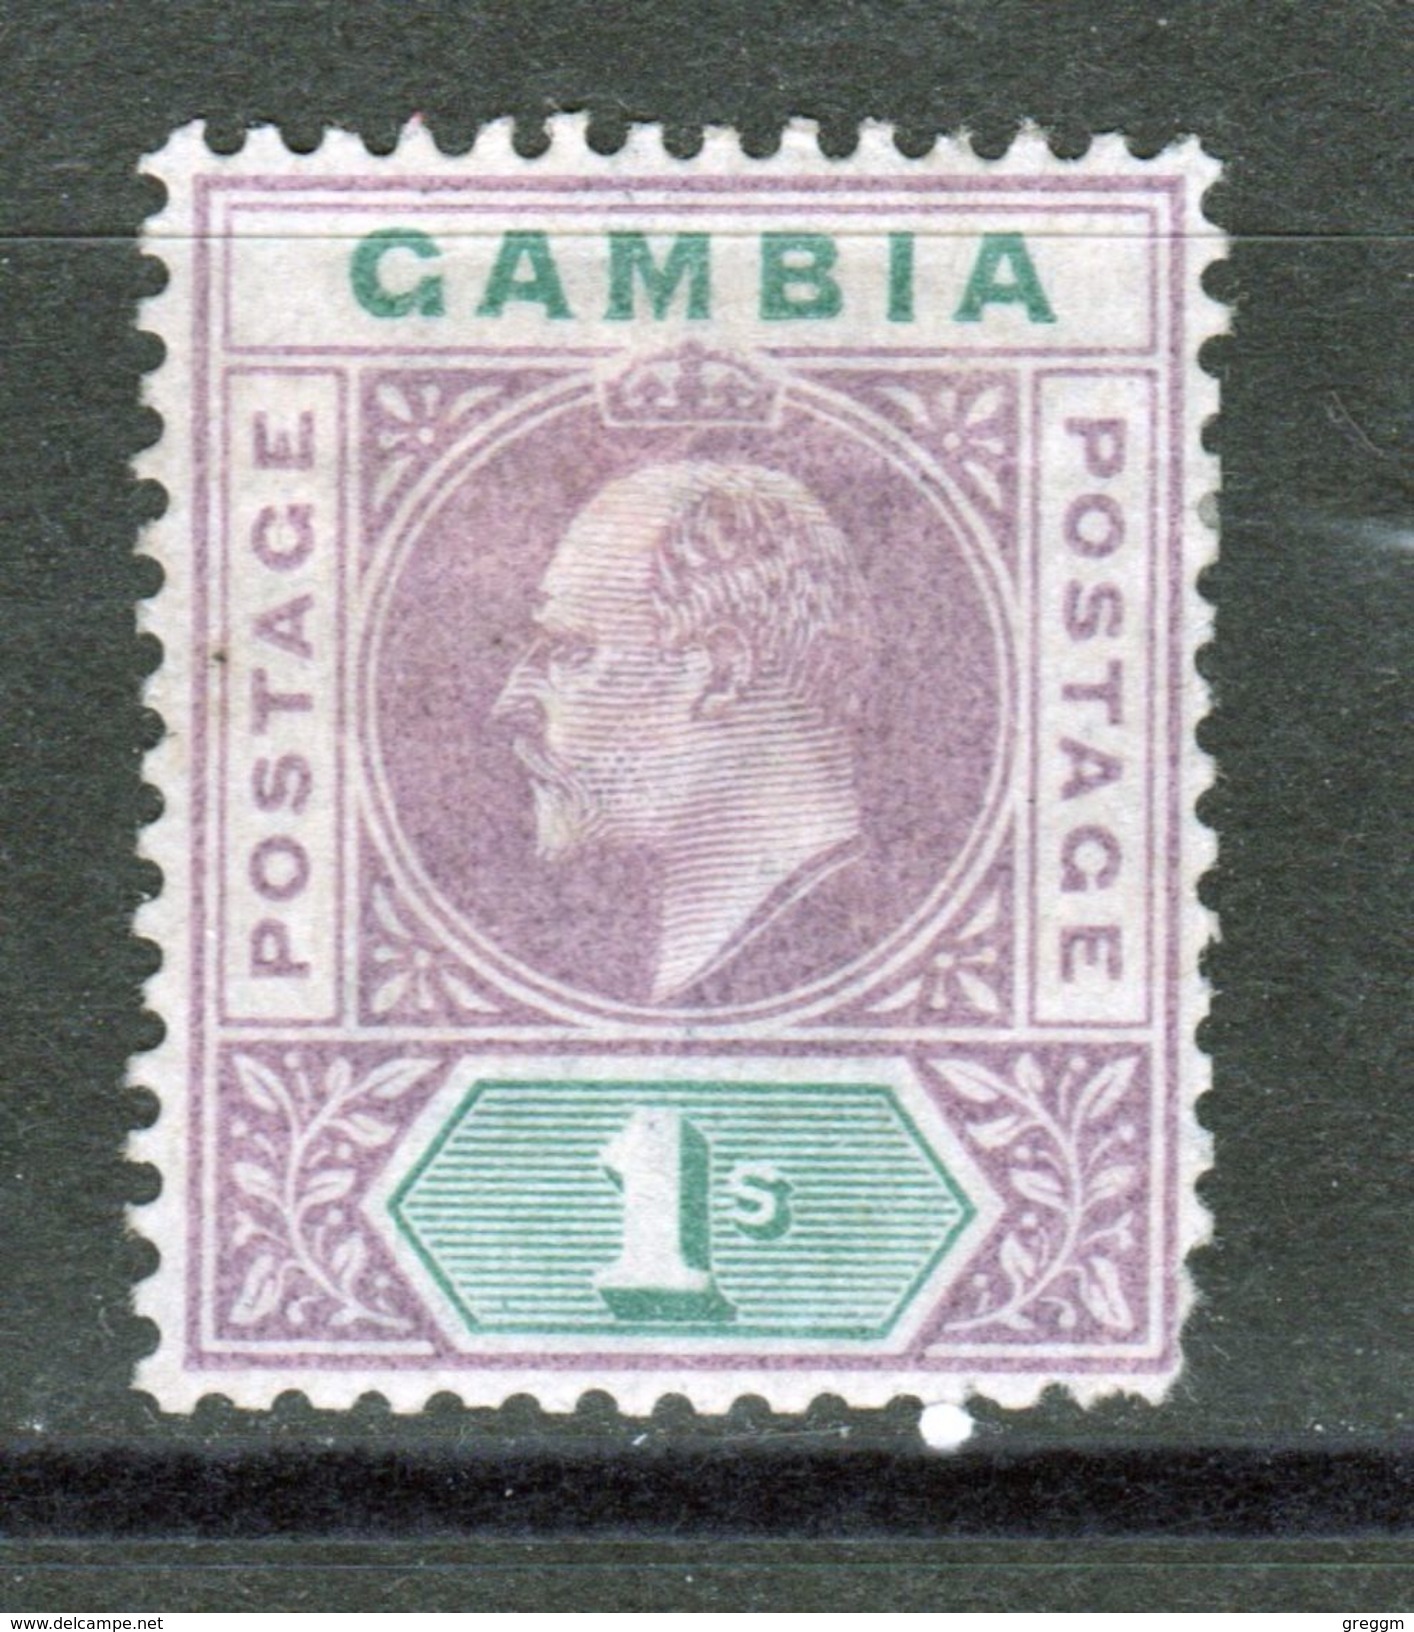 Gambia Edward VII Definitive One Shilling Stamp From 1902. - Gambia (...-1964)